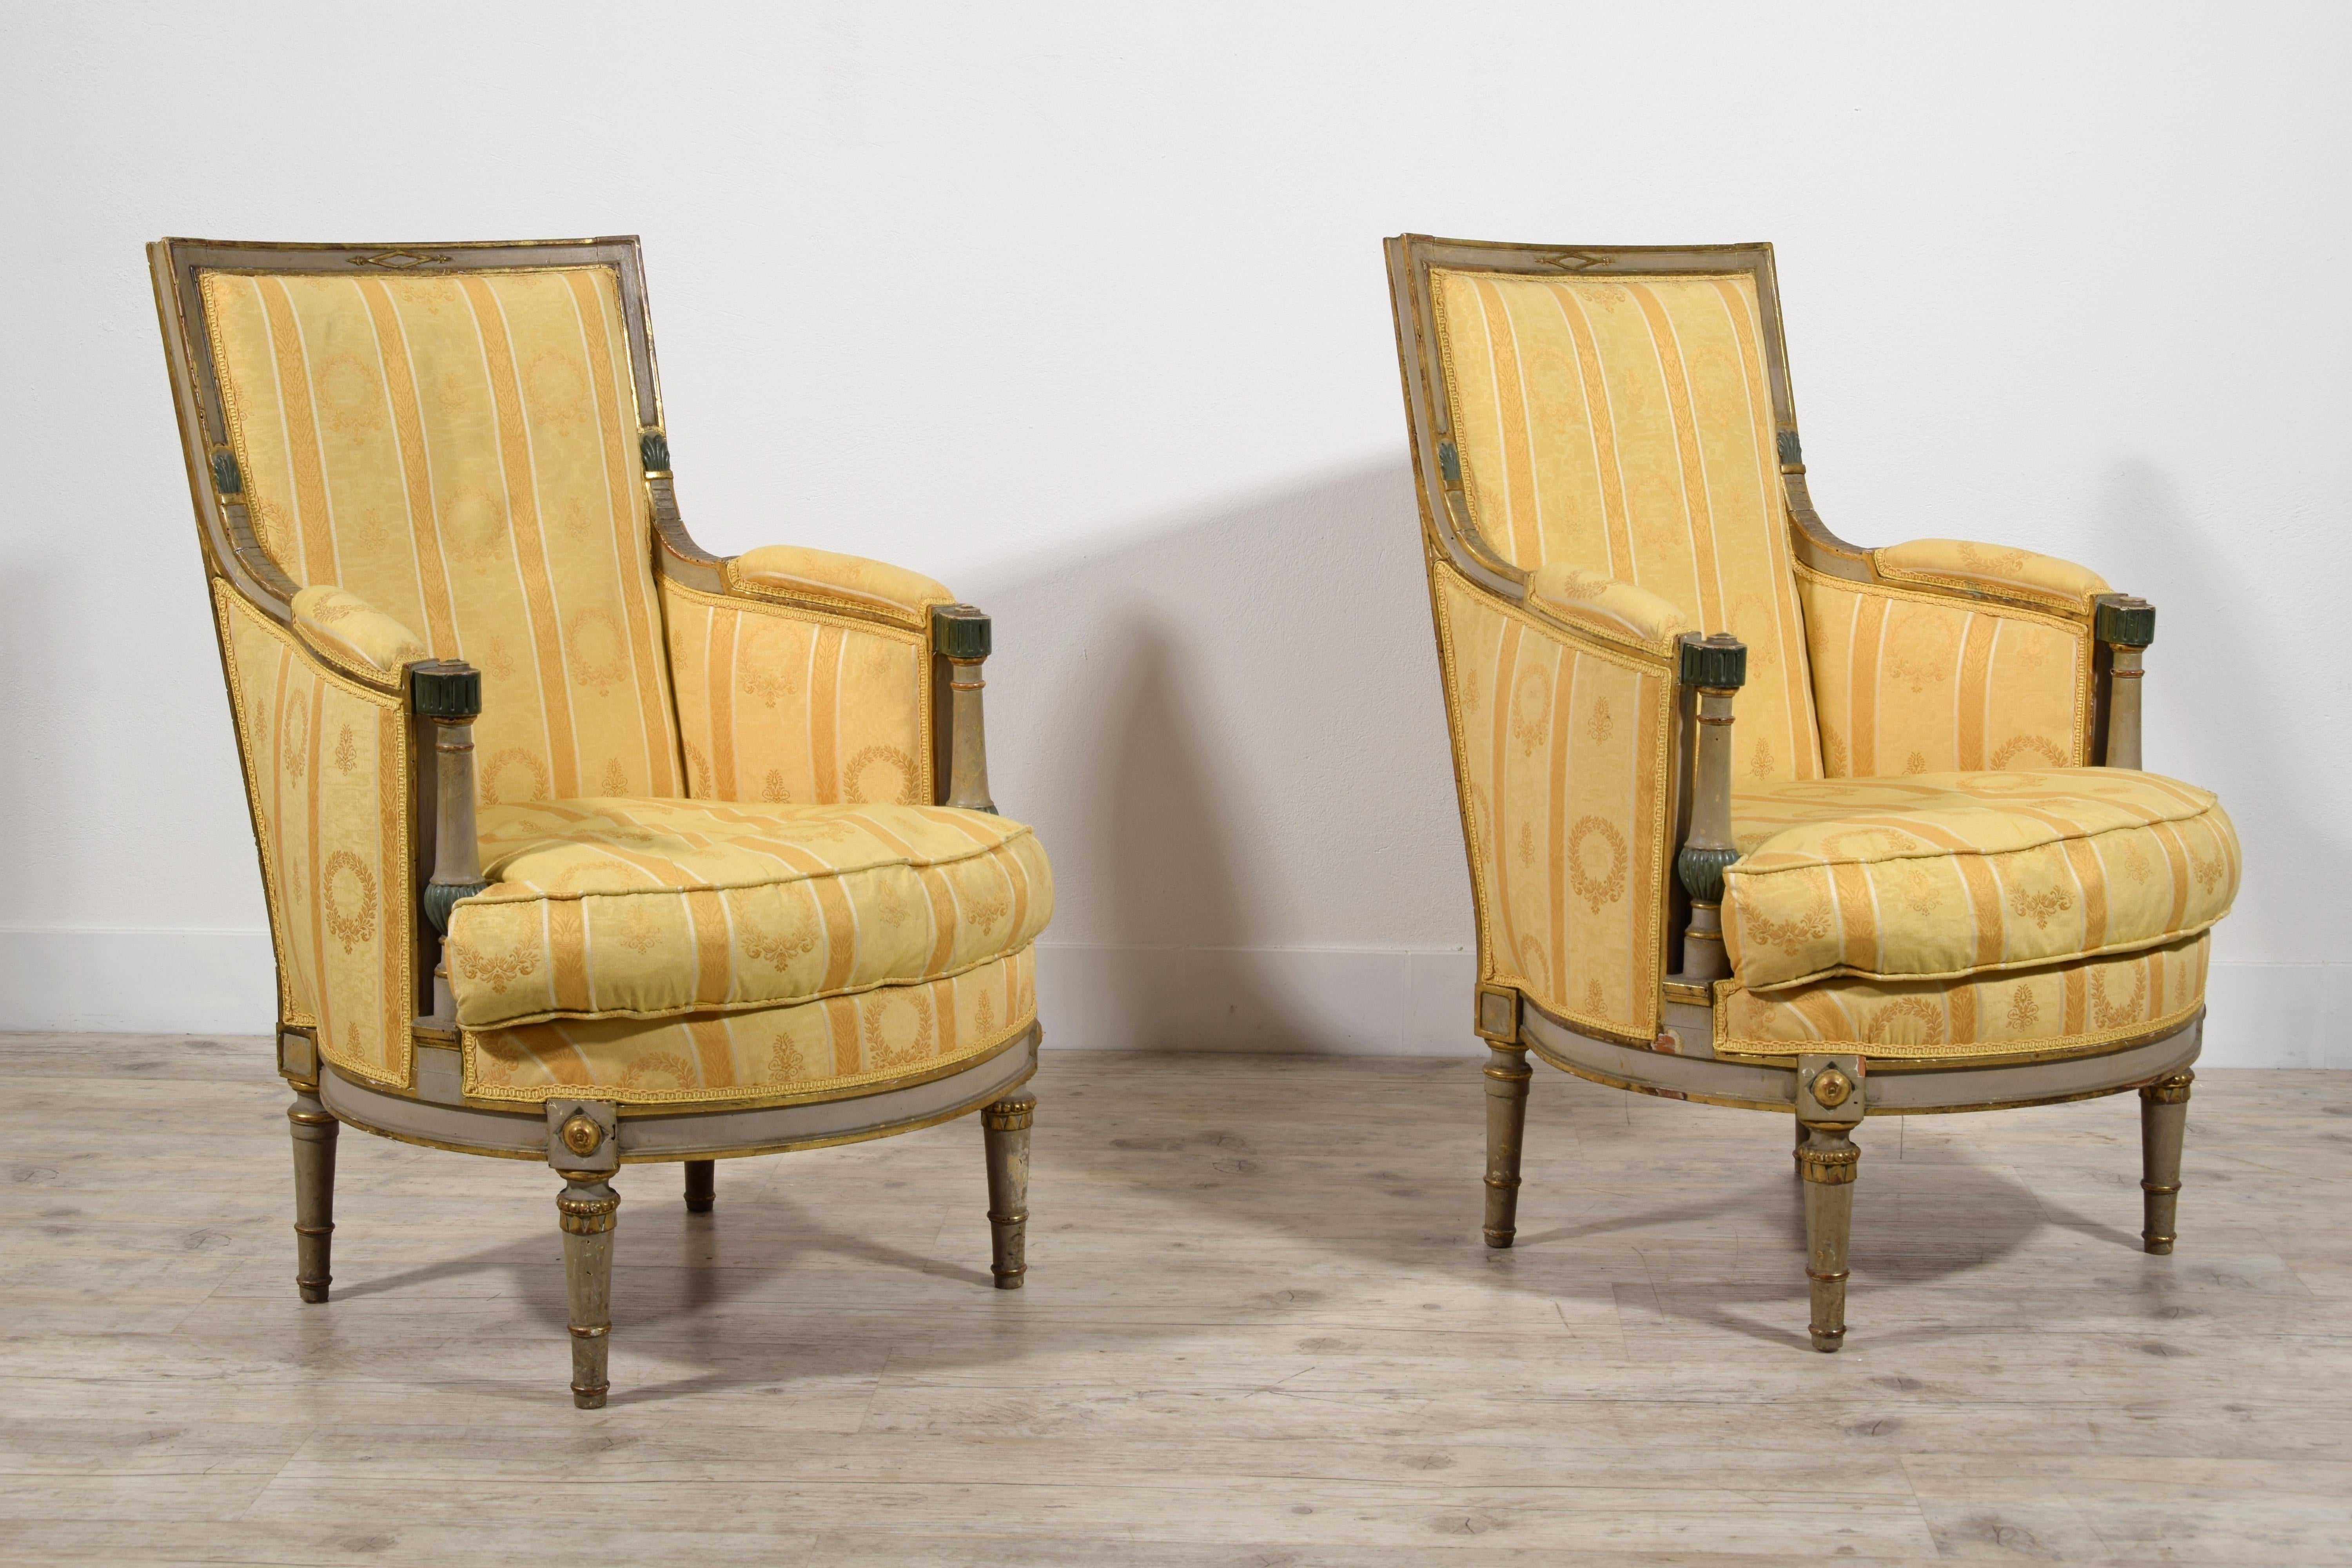 Hand-Carved 19th Century, Pair of French Lacquered and Giltwood Armchairs For Sale